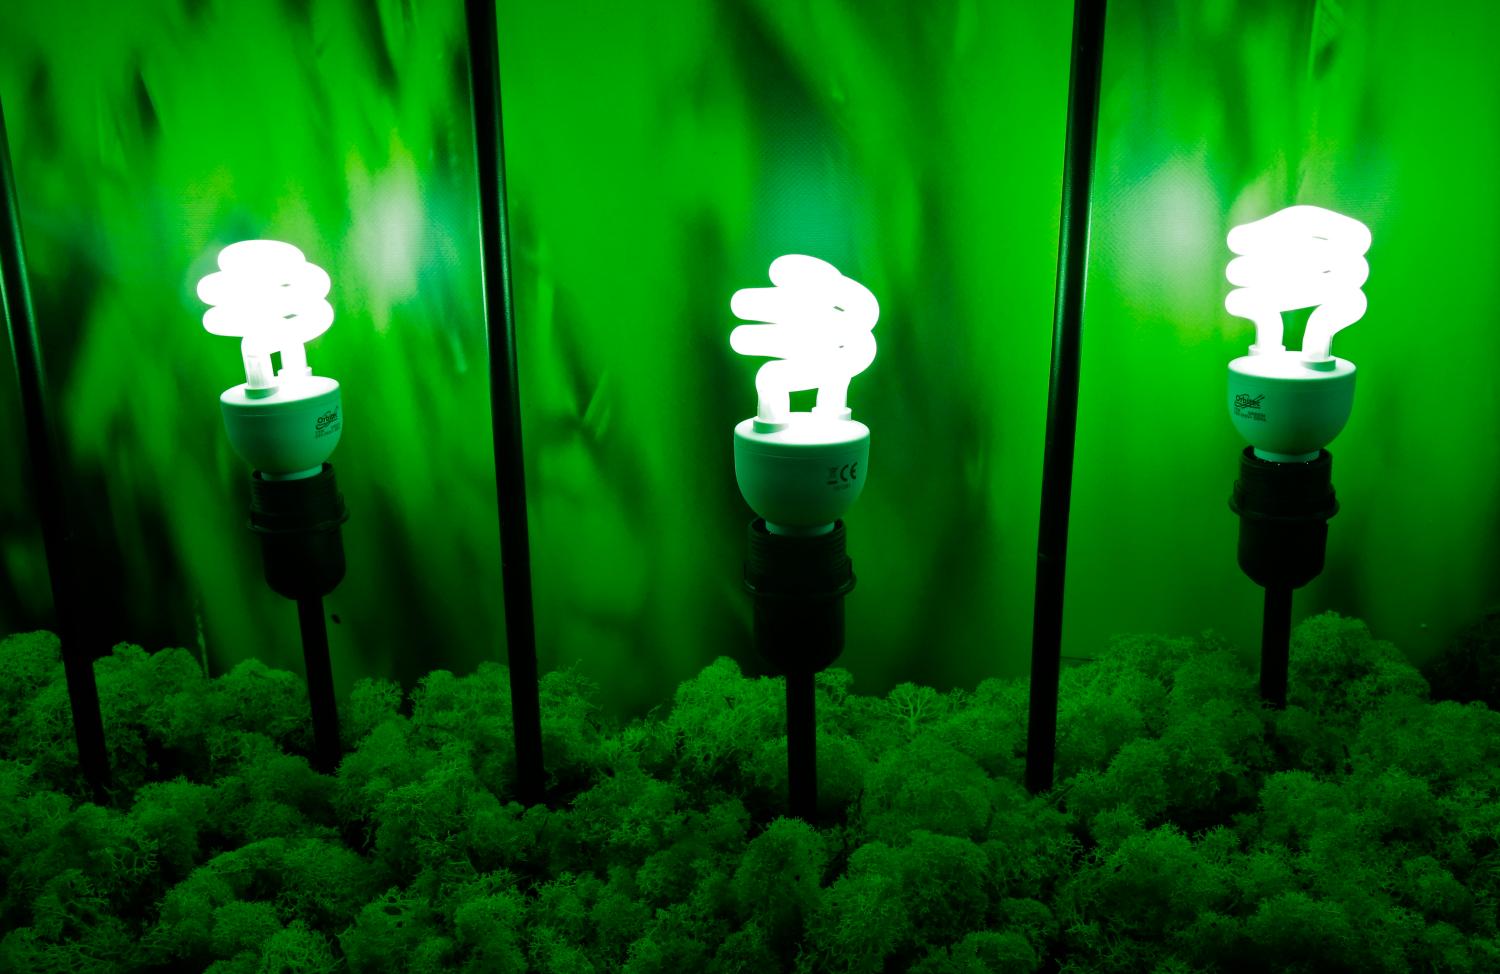 Green low-carbon electrical lights are displayed at the World Climate Change Conference 2015 (COP21) in Le Bourget, near Paris, France, December 2, 2015. REUTERS/Jacky Naegelen